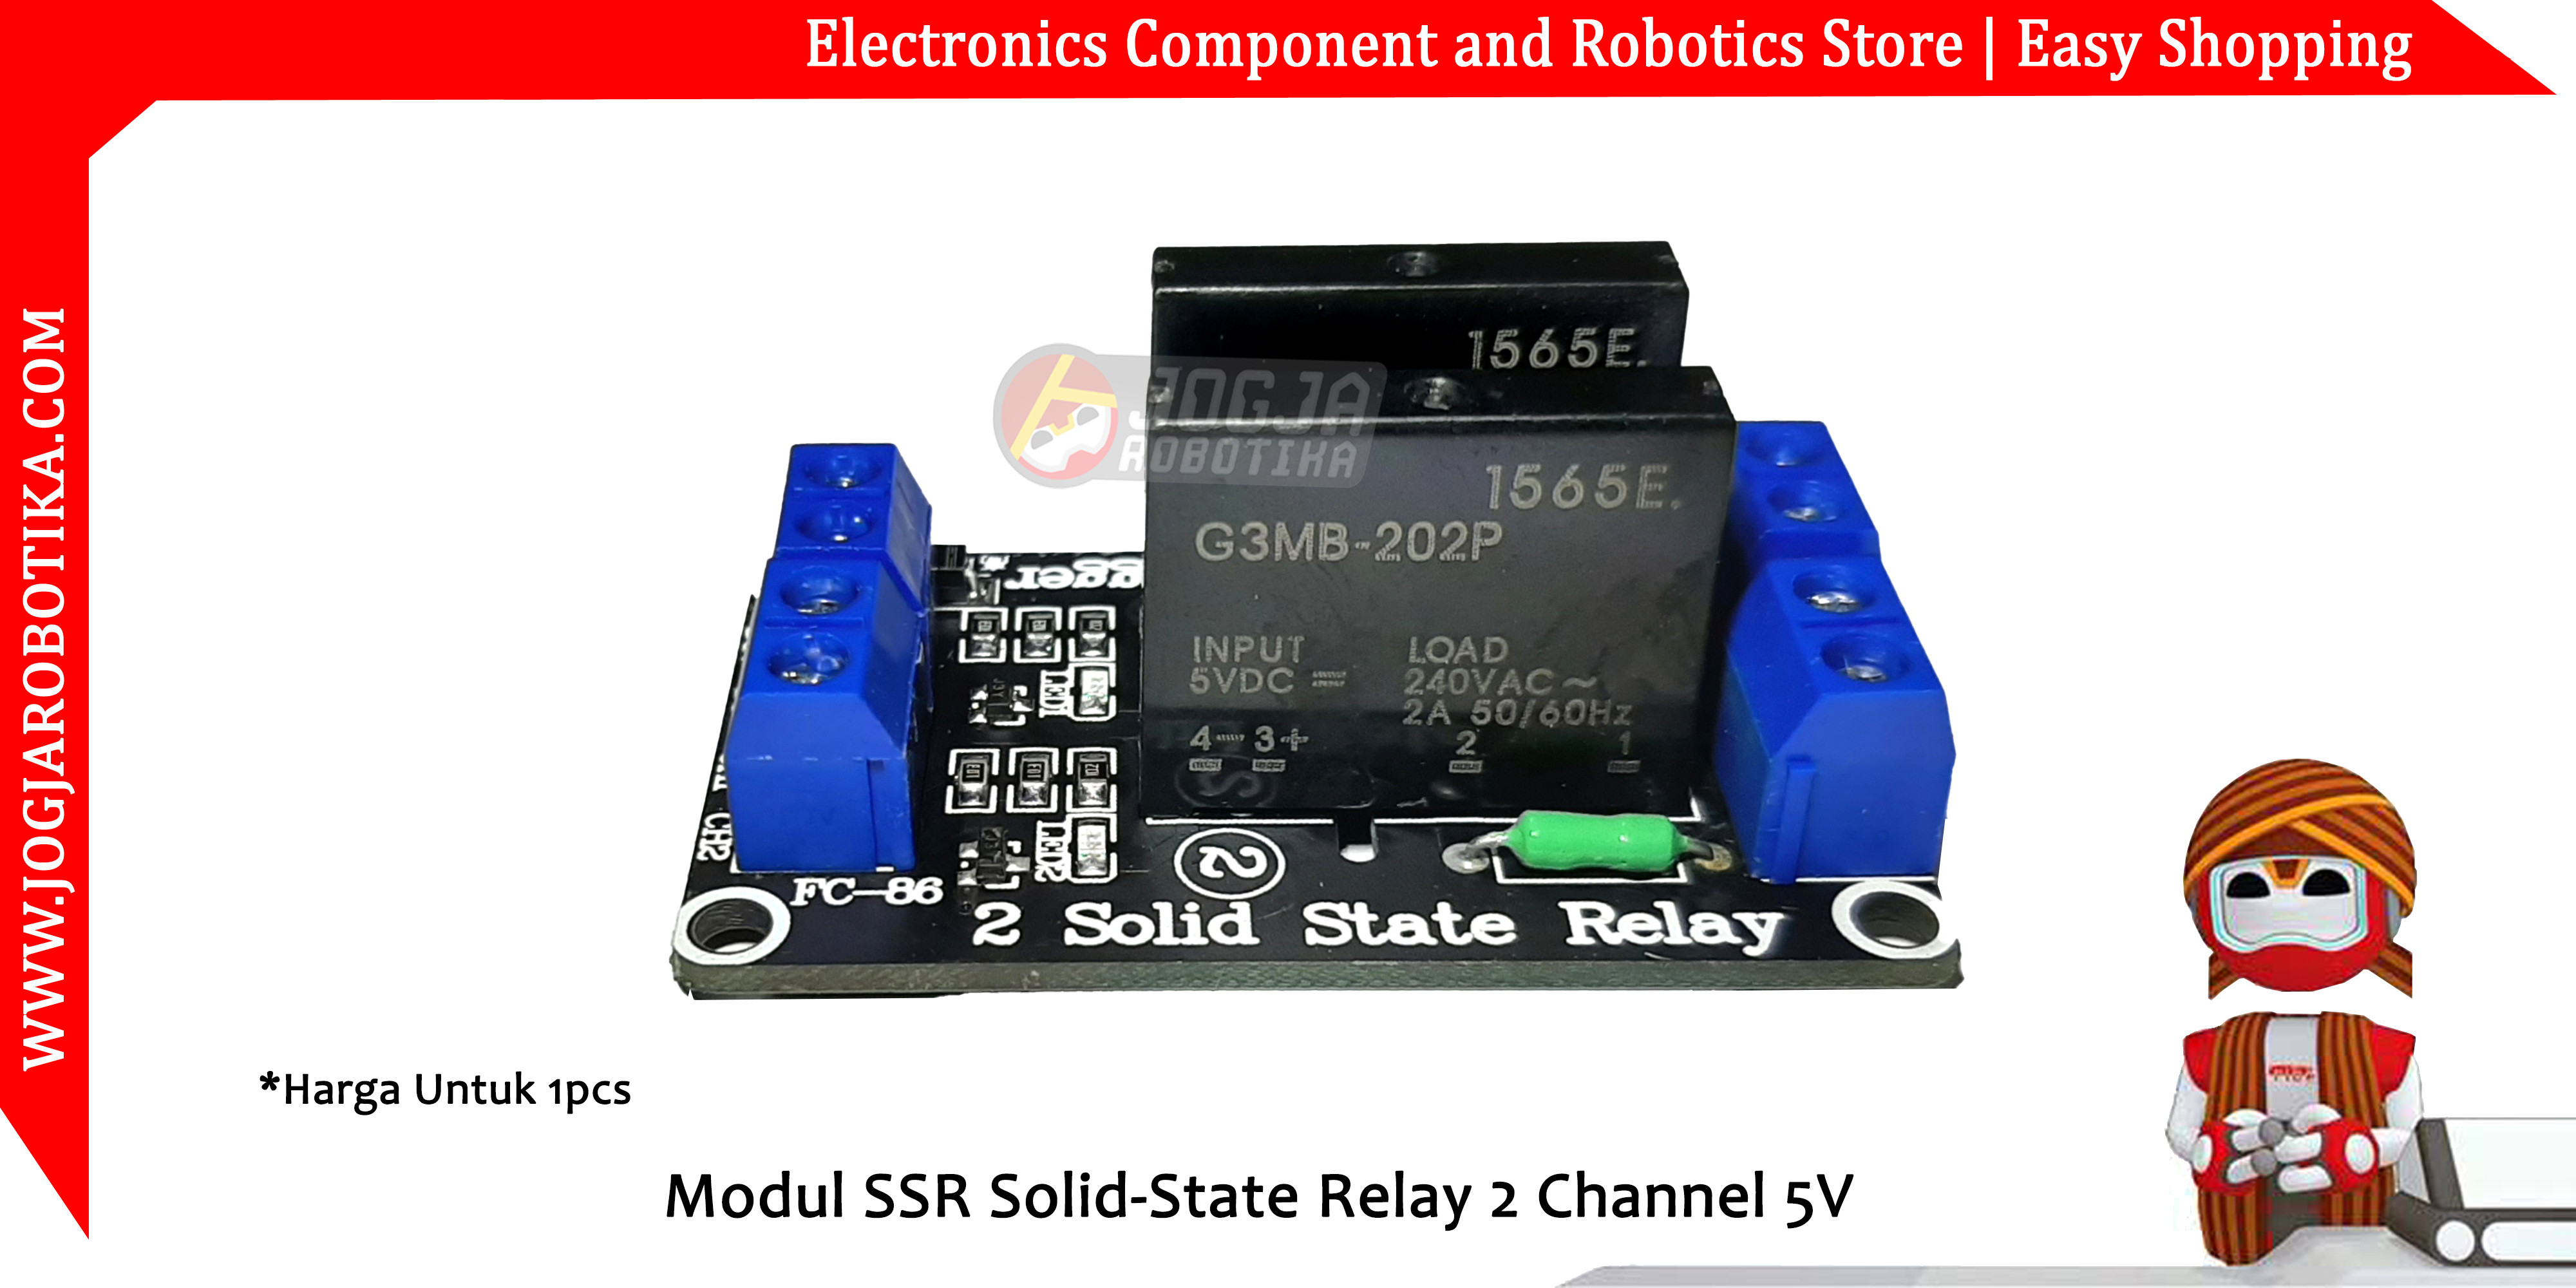 Jual Modul SSR Solid State Relay 2 Channel 5V